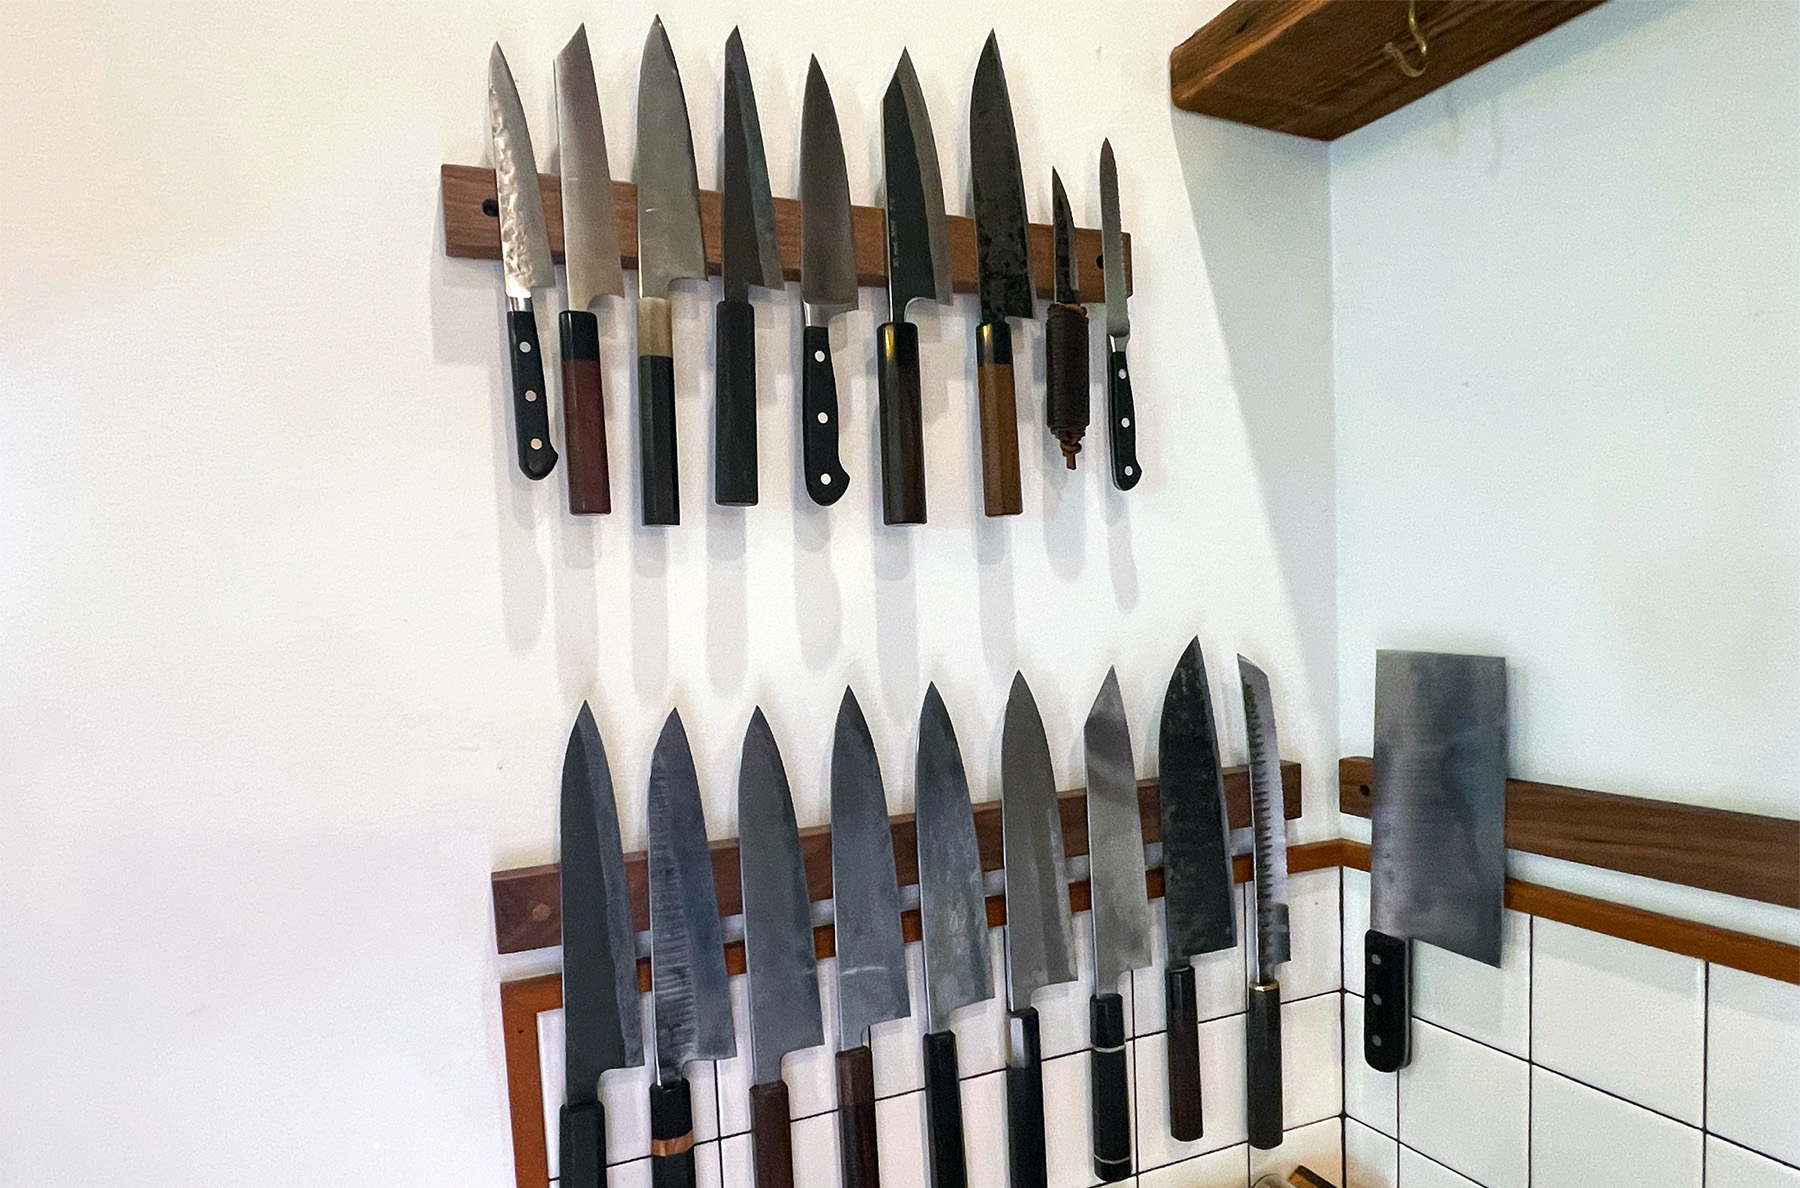 ON3P Skis founder, Scott Andrus, is known for being maniacal about the craft of building skis. But on our CRAFTED podcast, we talk with Scott about another obsession of his: knives — how he got into knives; knife quivers; patina chasing; price ranges; cutting boards; and more.